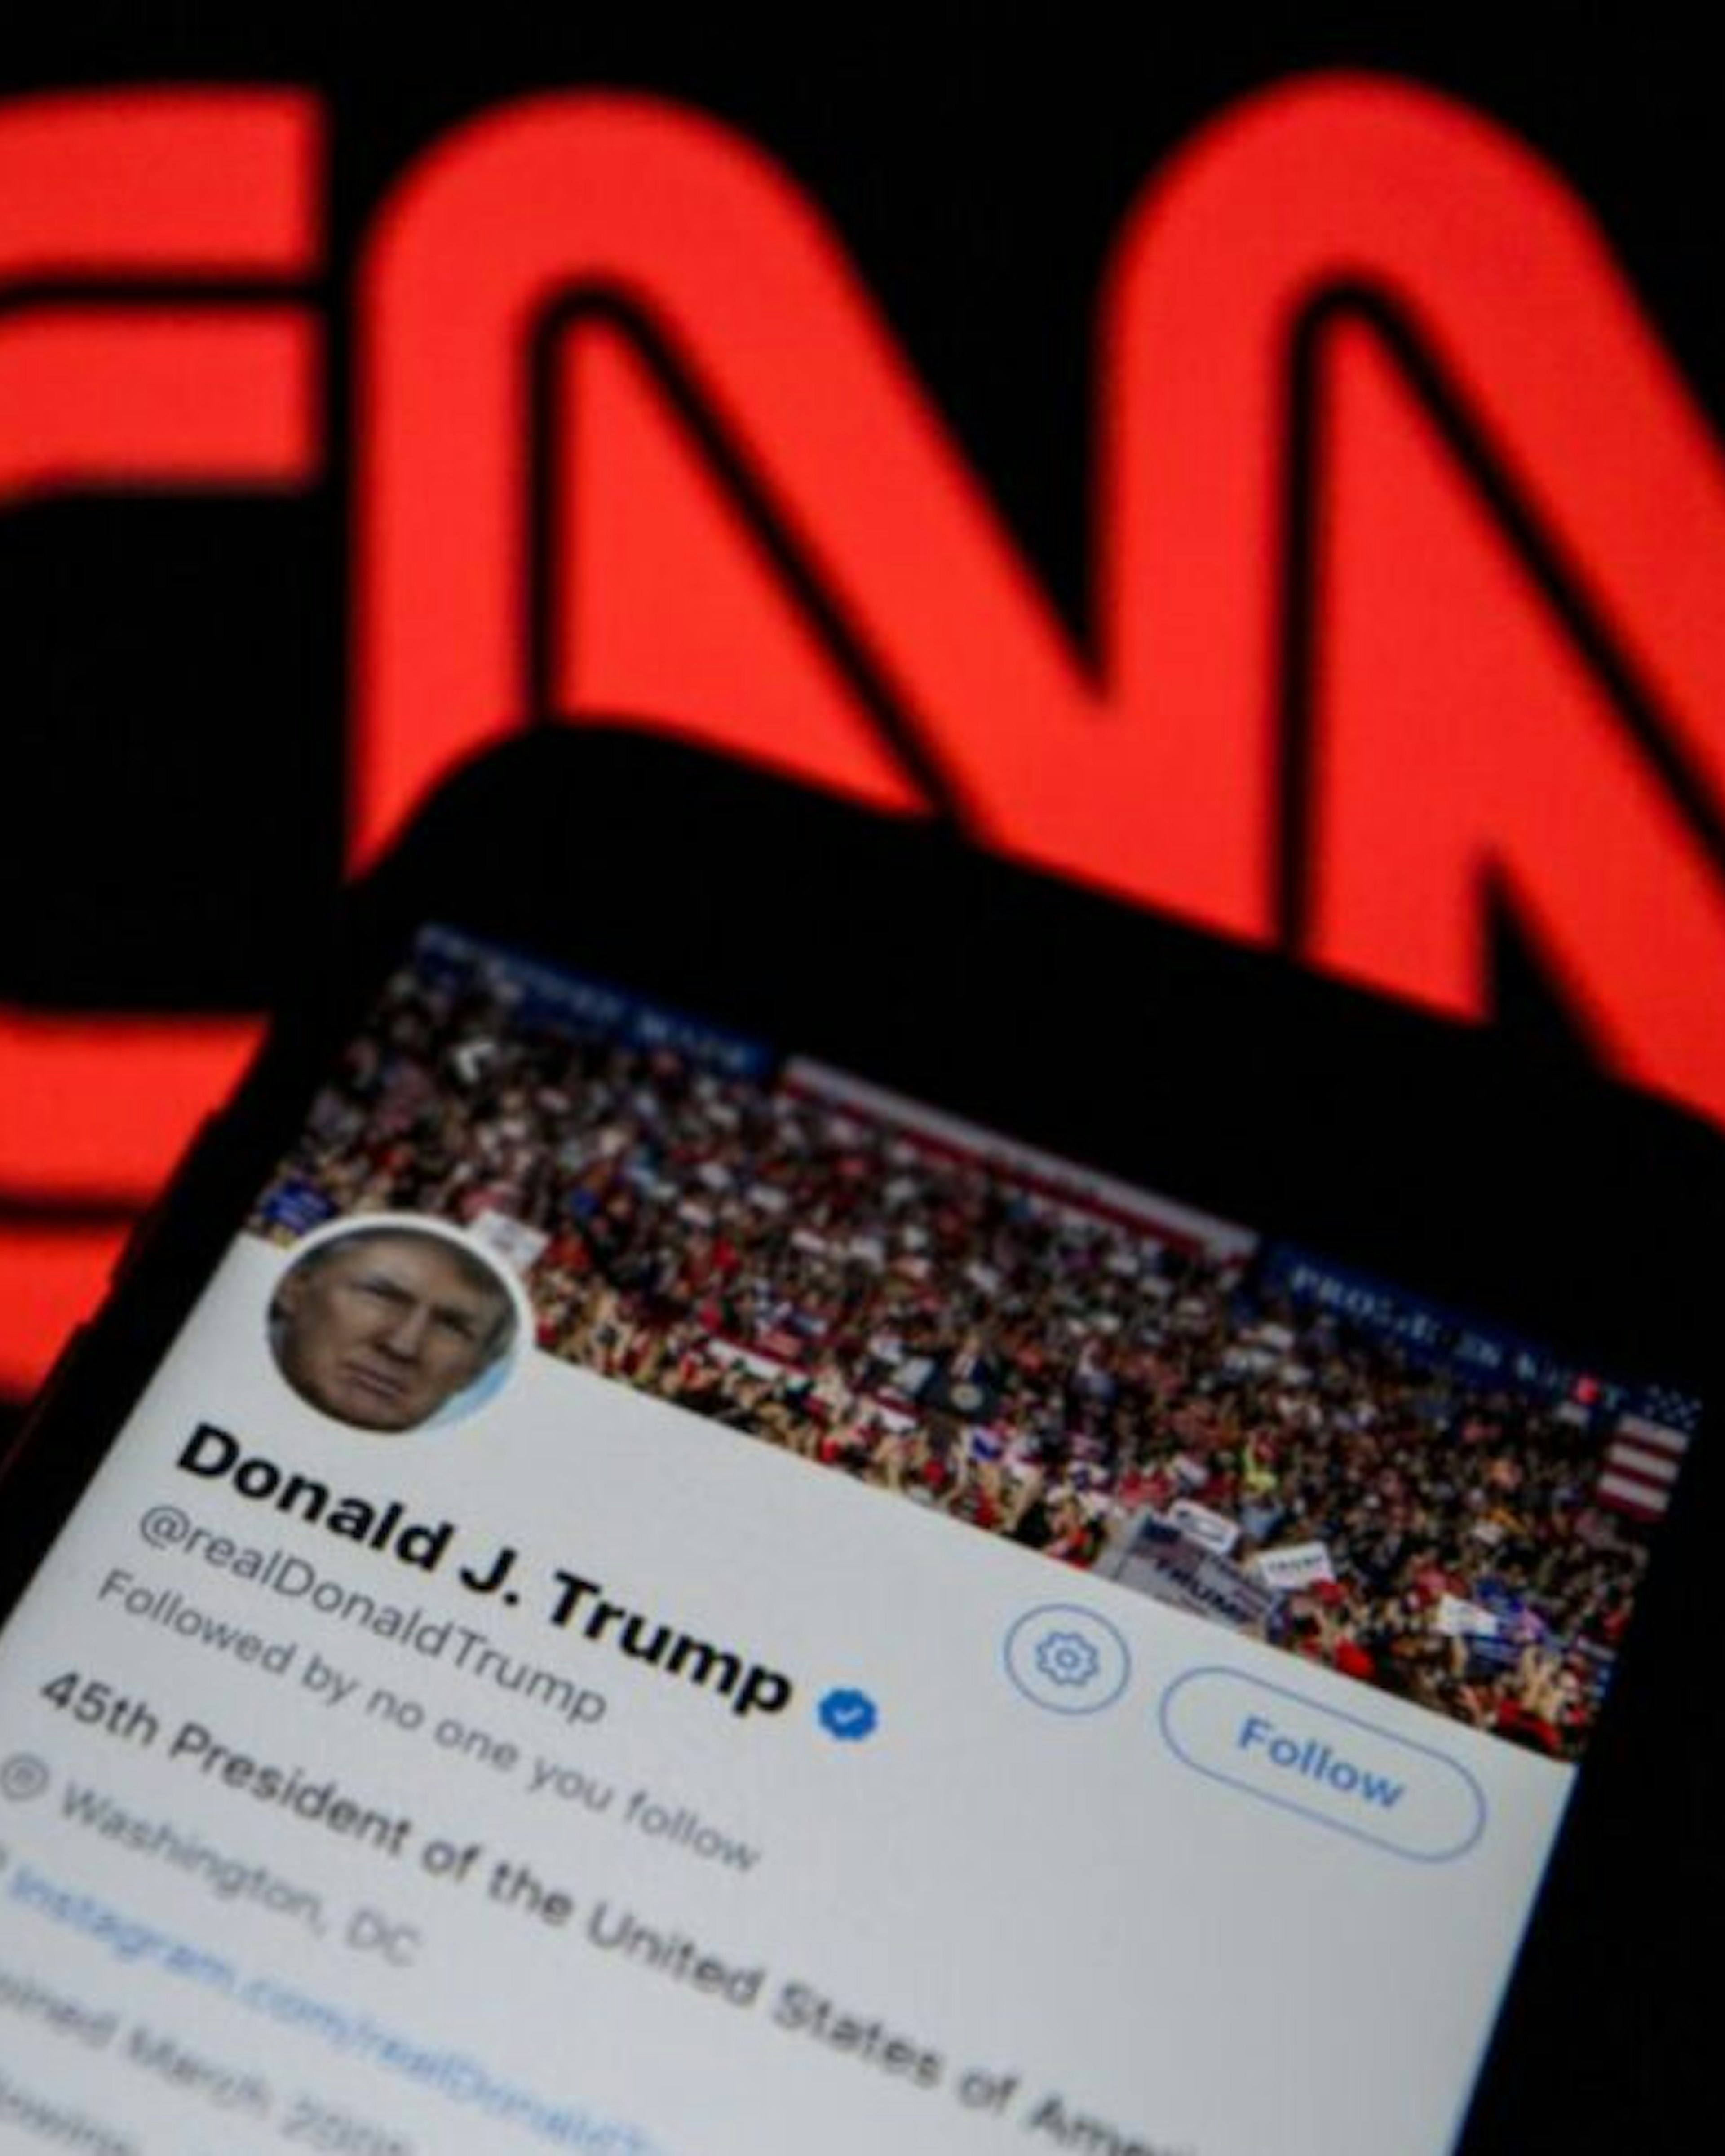 Donald Trump's Twitter timeline is seen on a smartphone against a backdrop with the CNN TV channel logo, in Ankara, Turkey on December 9, 2018.